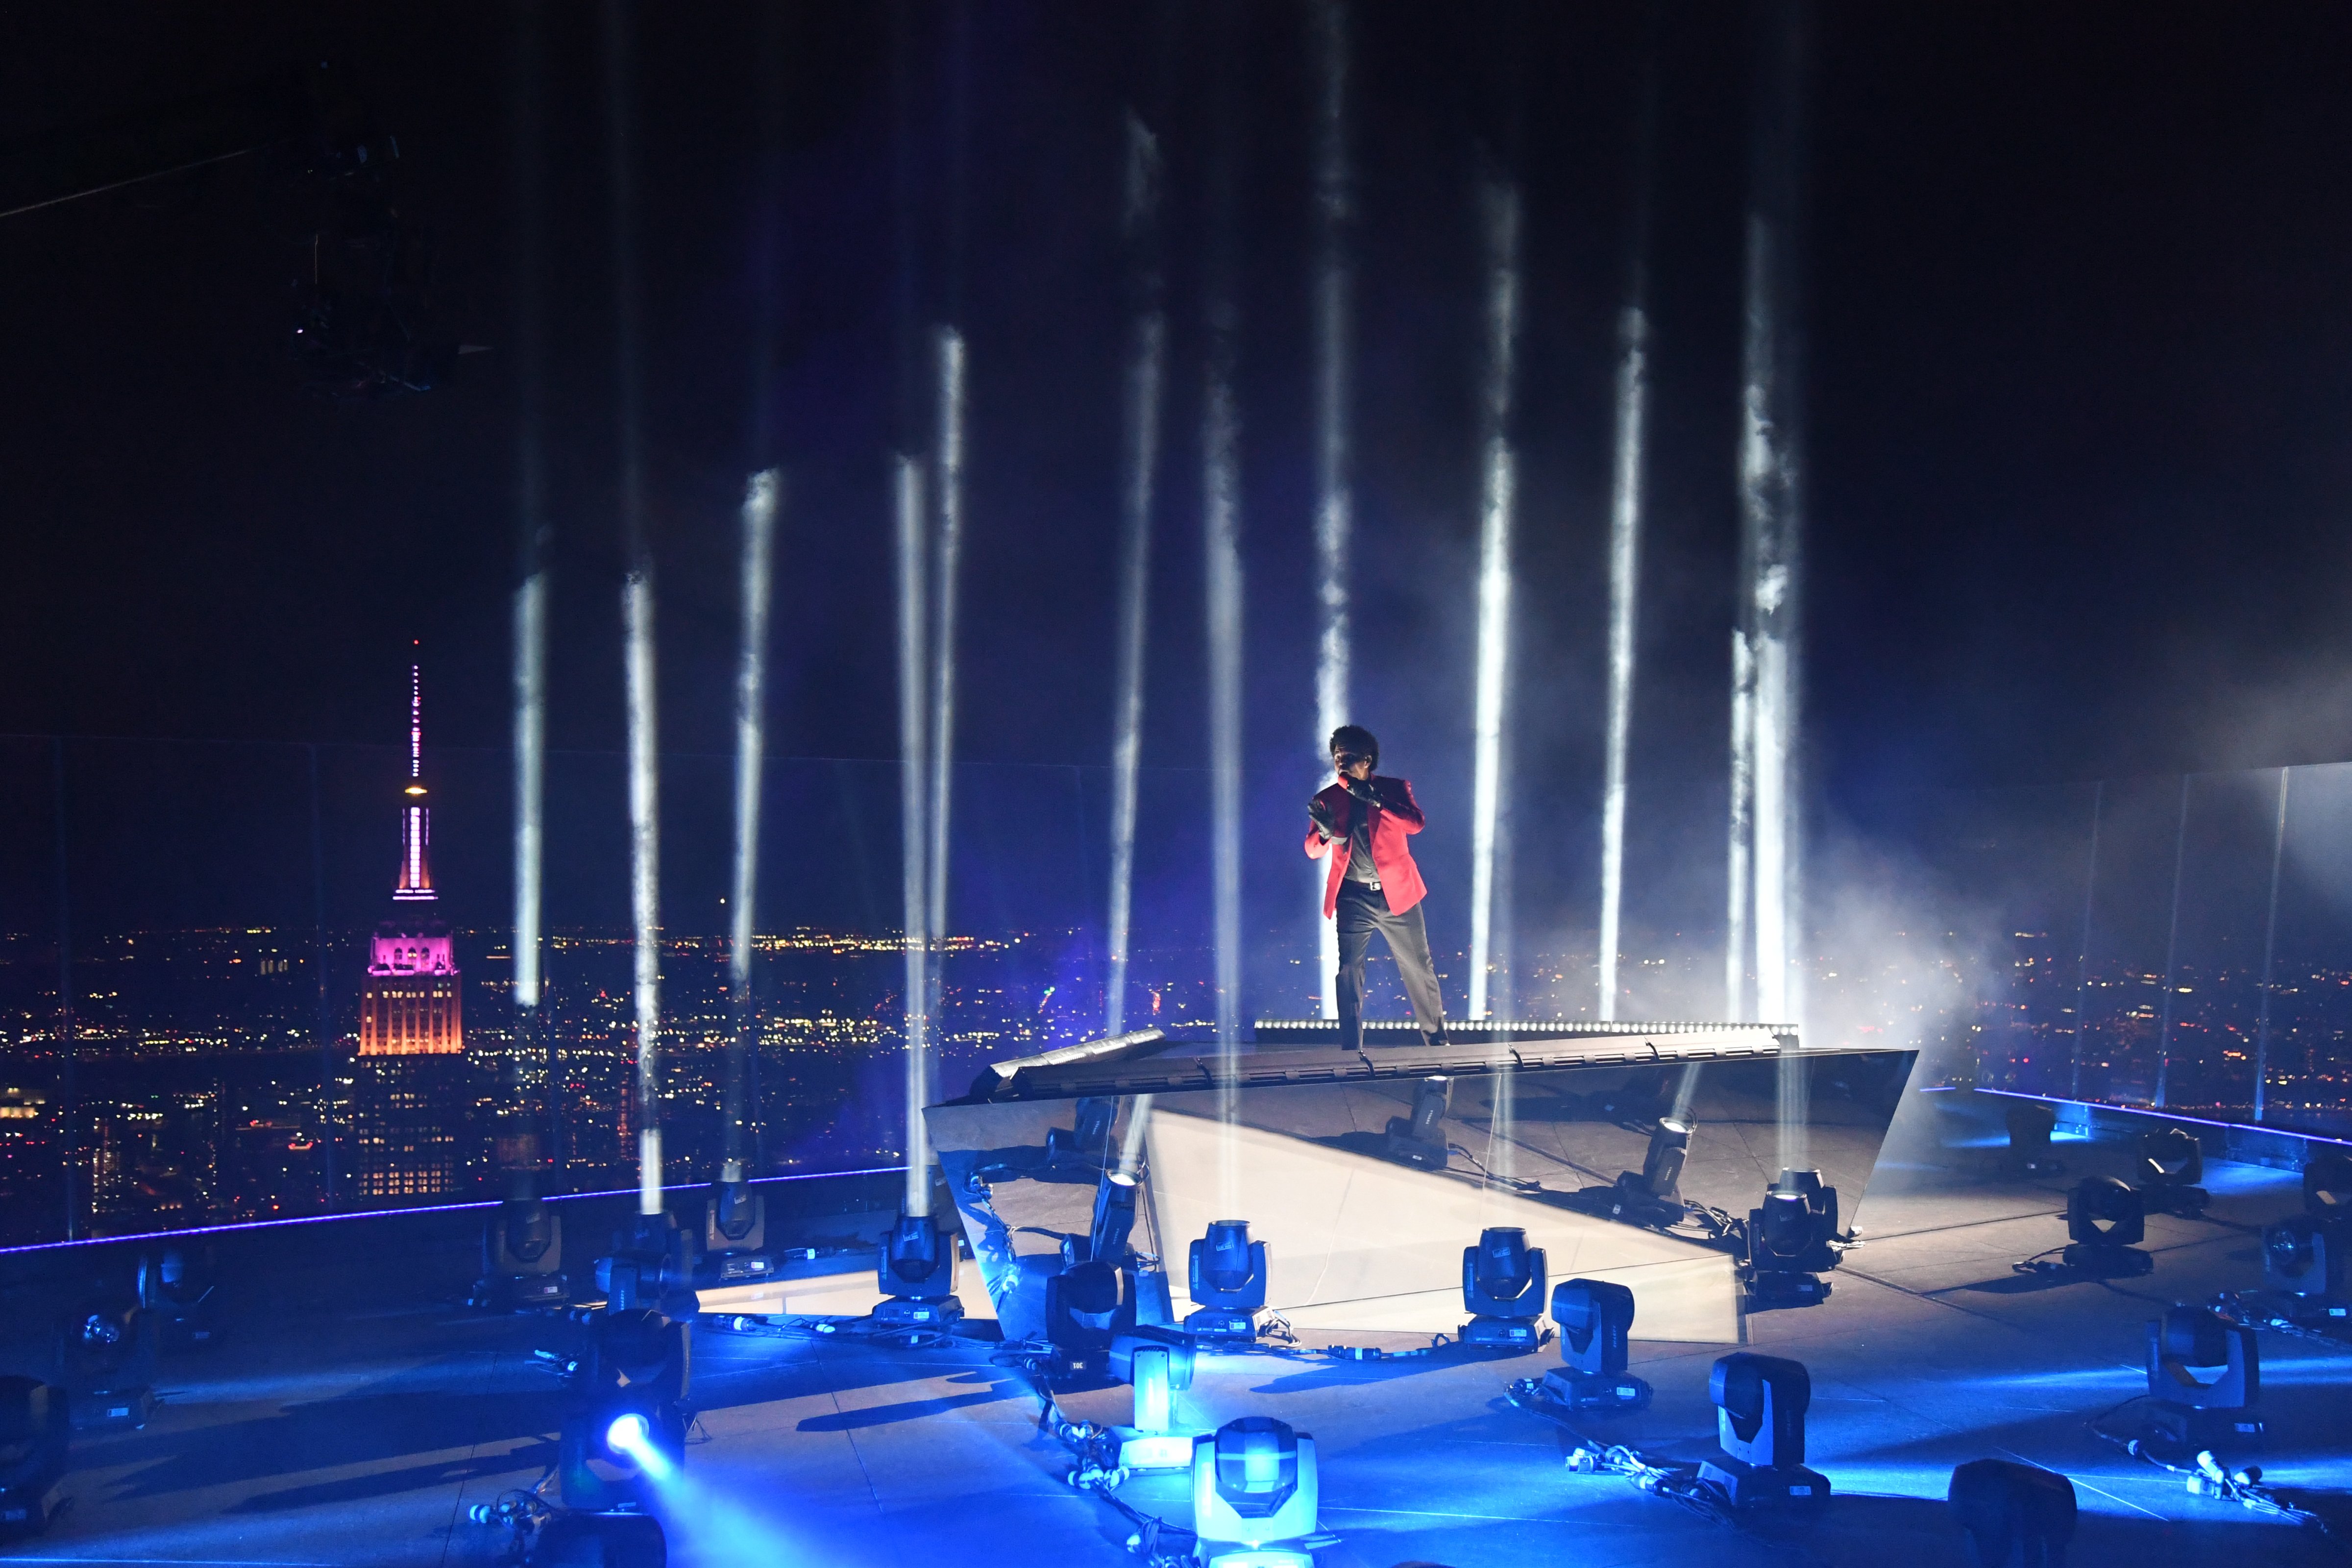 The Weeknd performs at Edge at Hudson Yards for the 2020 MTV Video Music Awards, broadcast on Sunday, August 30, 2020 in New York City. (Getty Images for MTV&mdash;MTV)